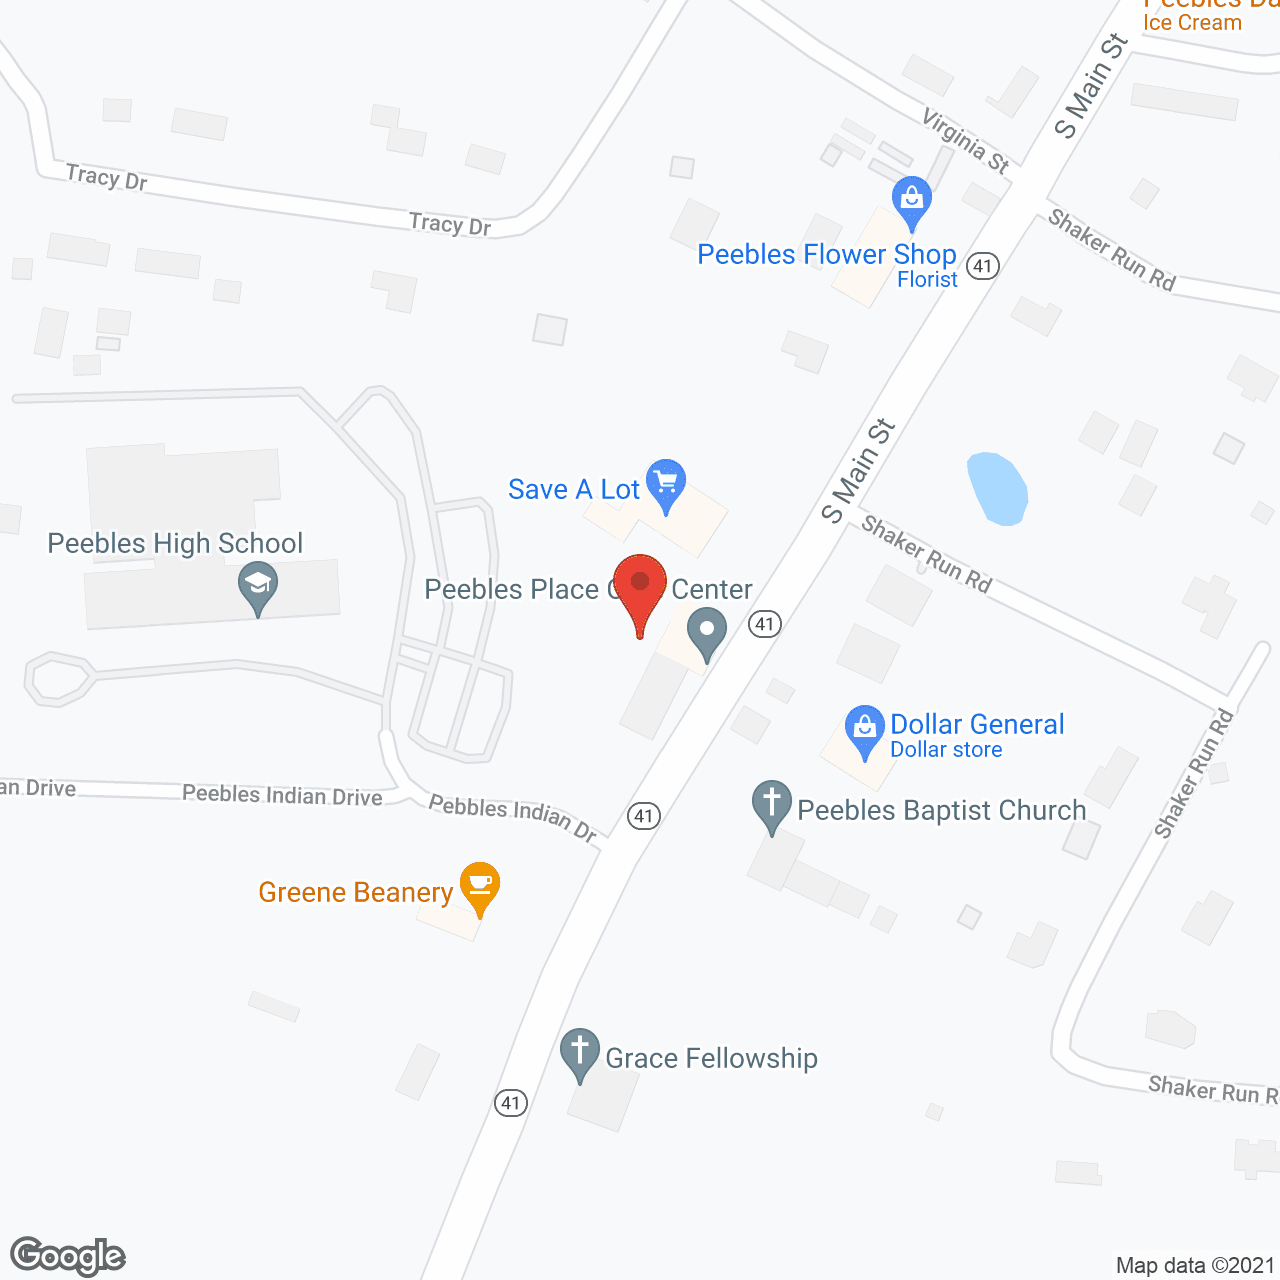 Peebles Place Care Center in google map